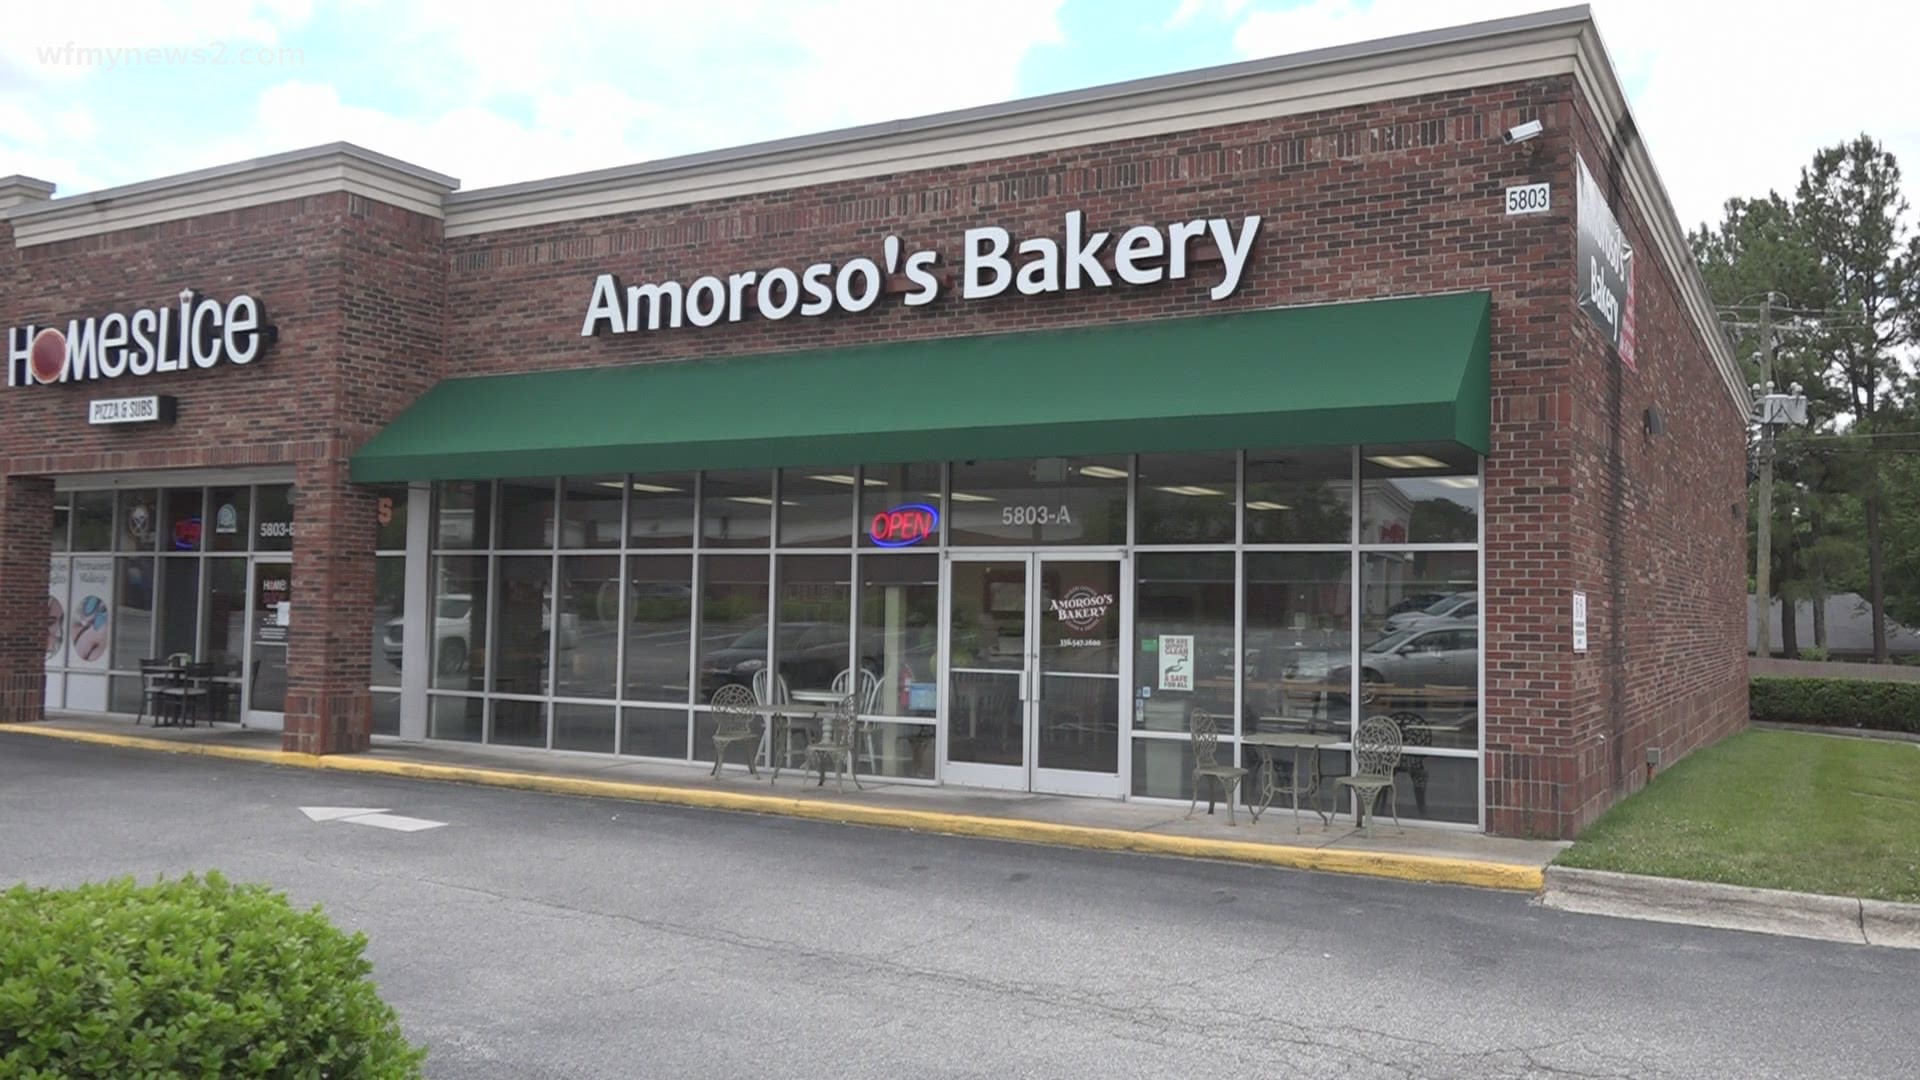 Amoroso's Bakery closed its High Point Location on June 12 after serving customers there for 11 years. The Greensboro location remains open.